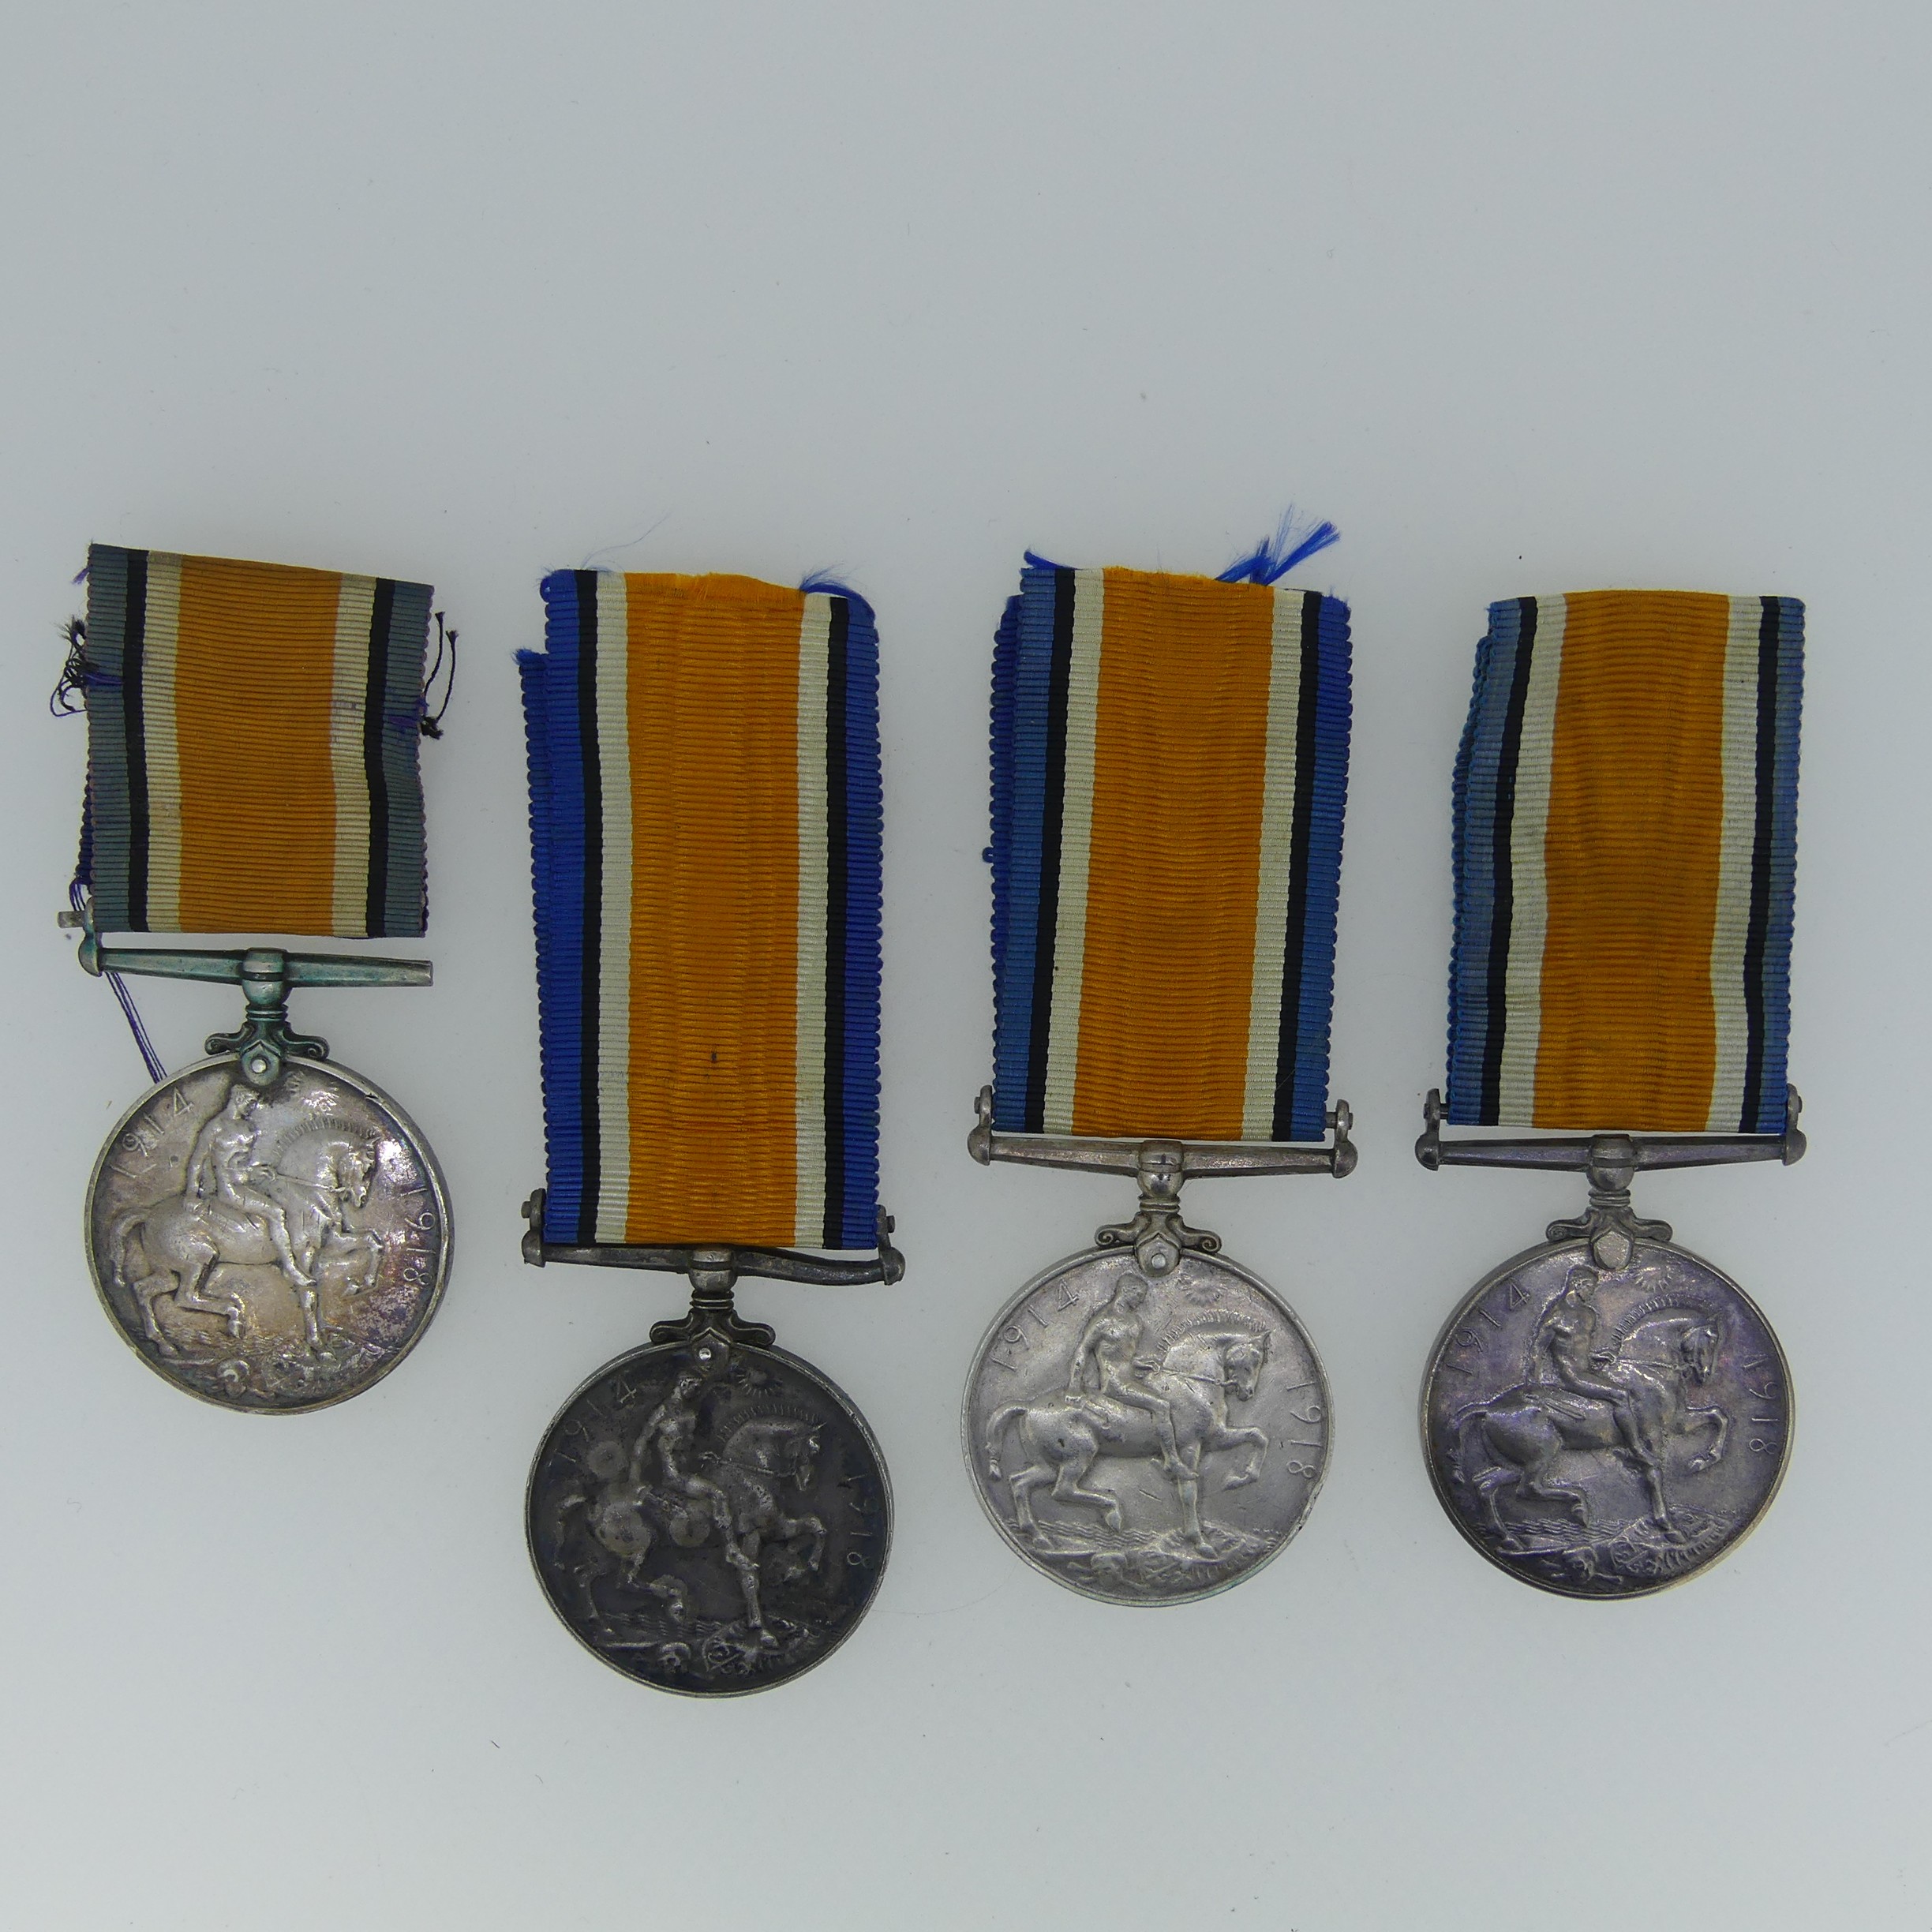 British War Medals (4) 52224 Pte. B Davies RAMC (some edge knocks and pitting) 25314 Pte W.T. Deacon - Image 2 of 6